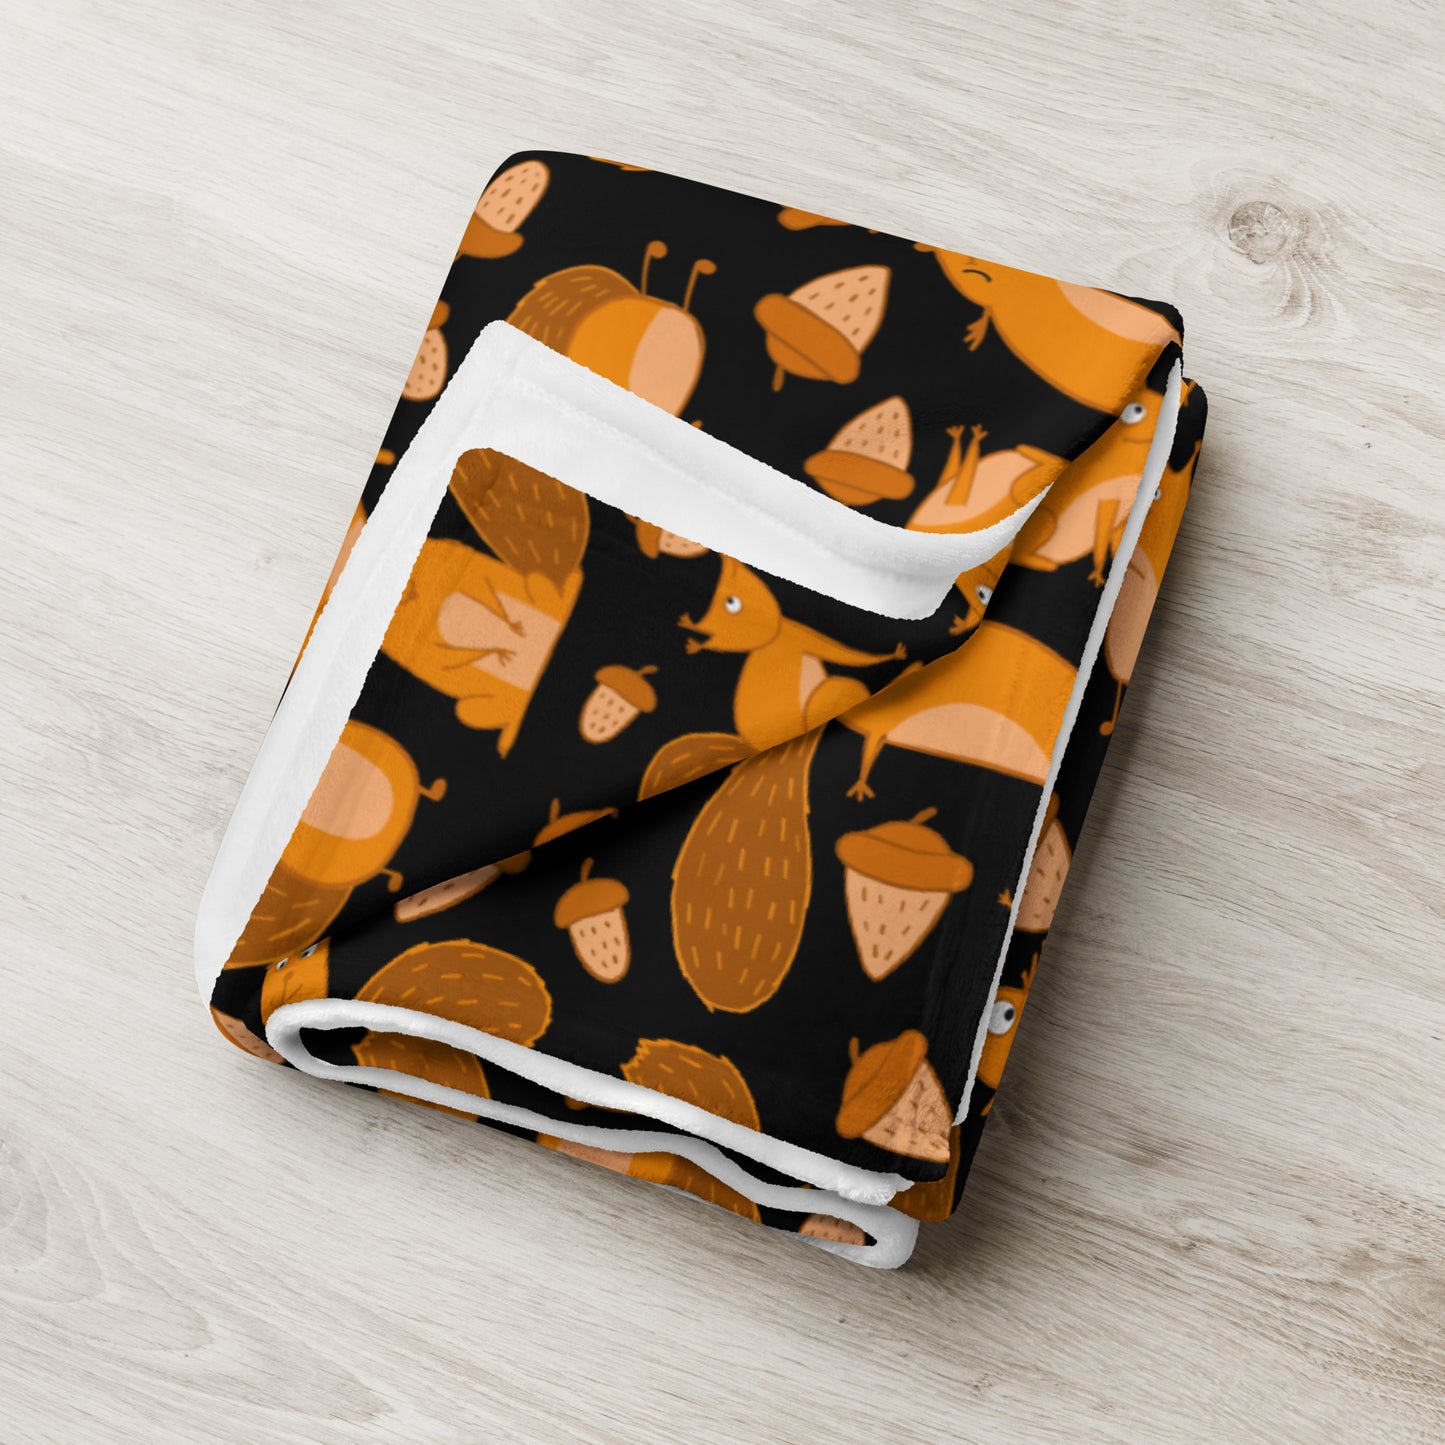 Throw blanket black color with funny orange squirrels and nuts